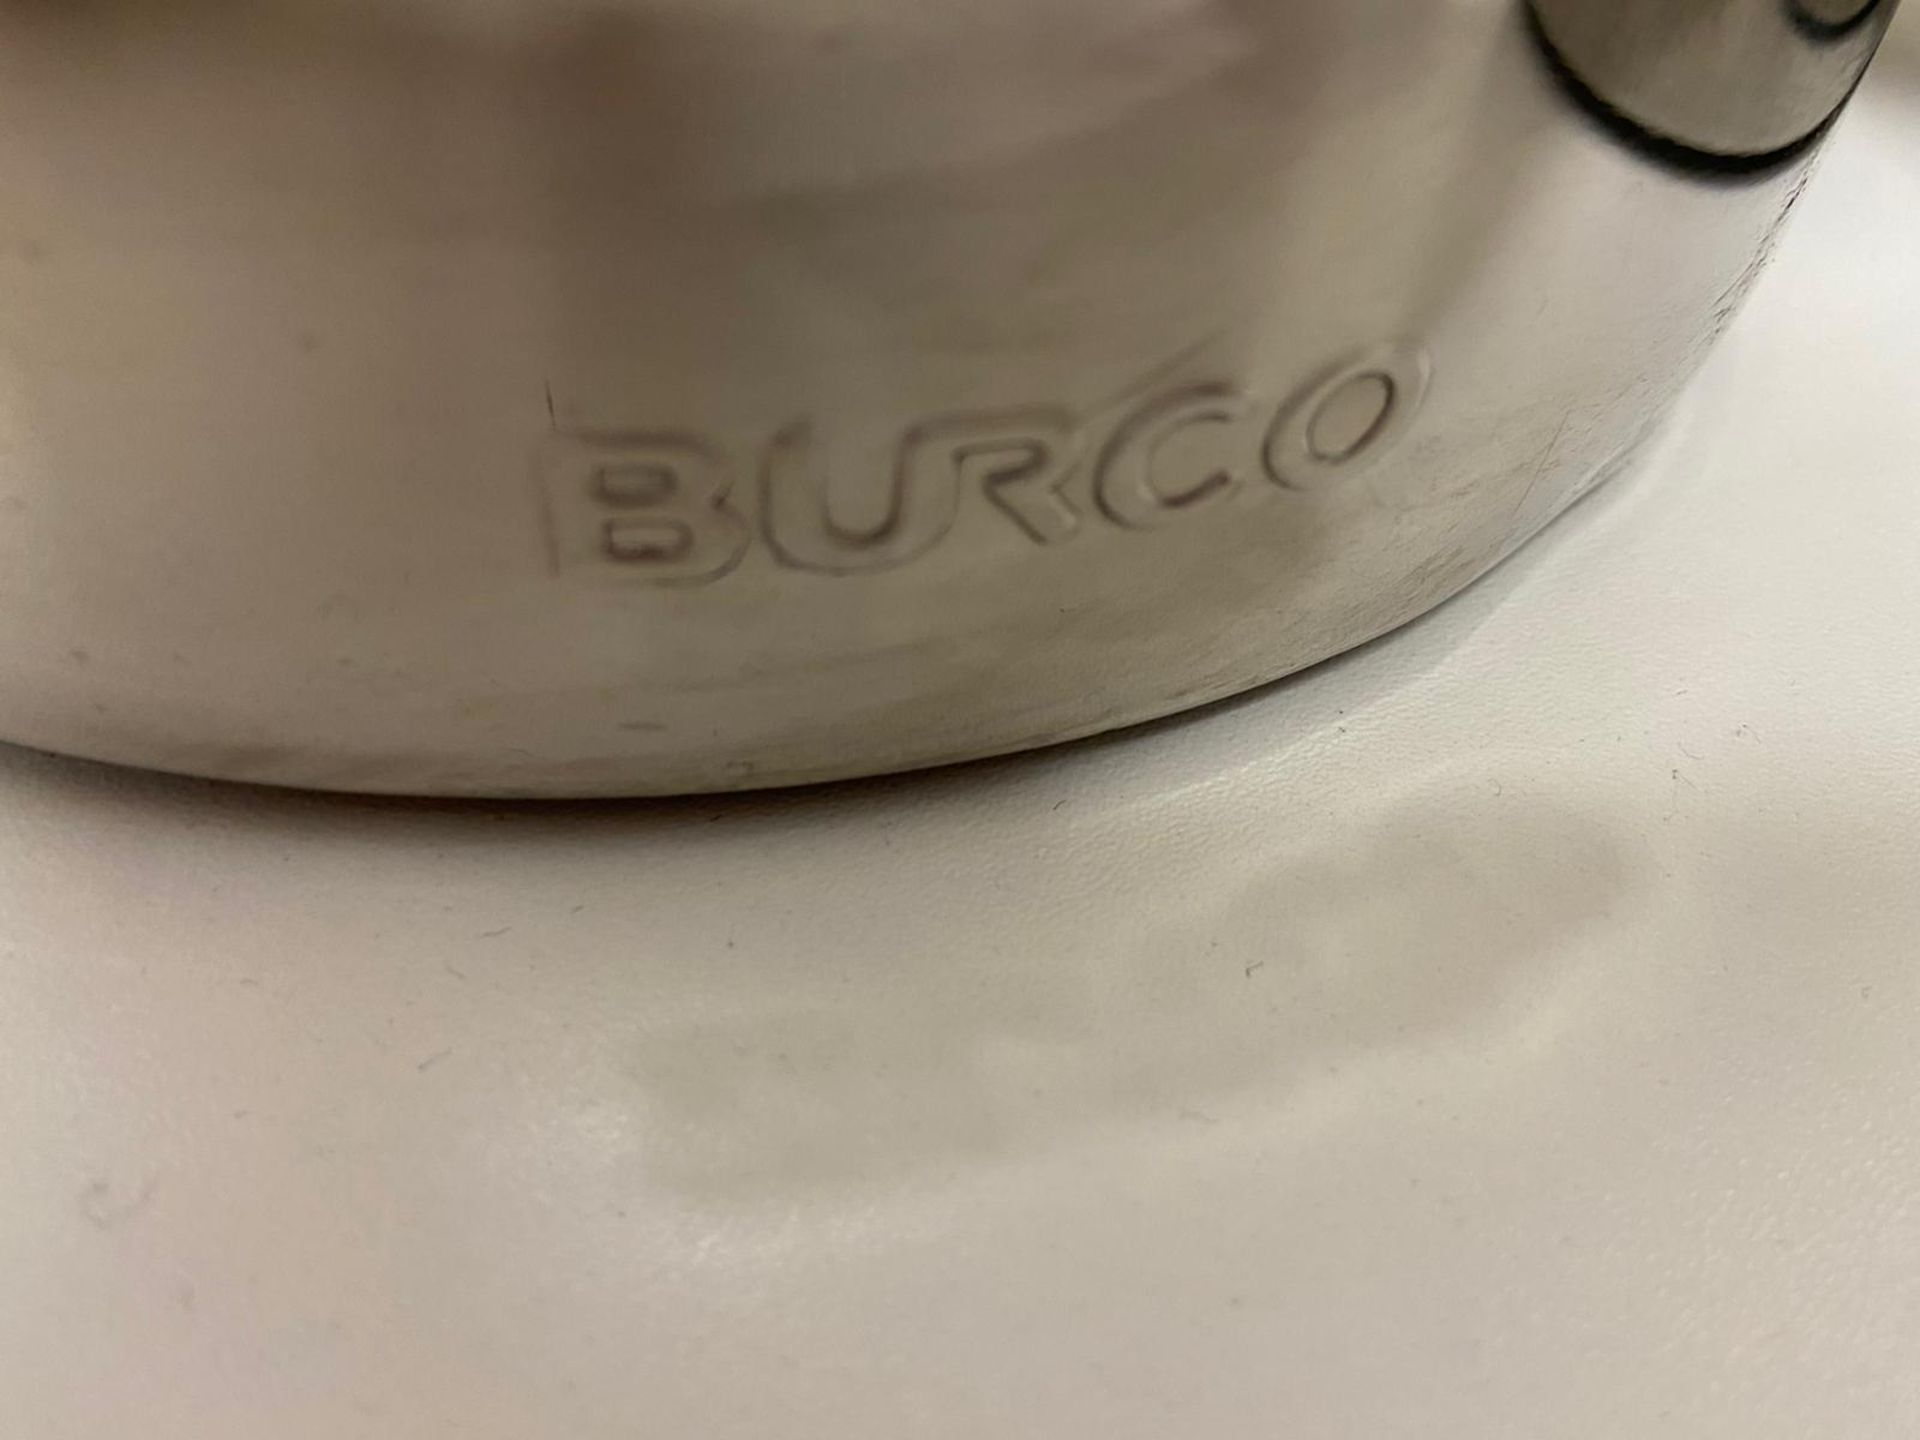 Burco Stainless Steel electric kettle x2 - Image 2 of 3